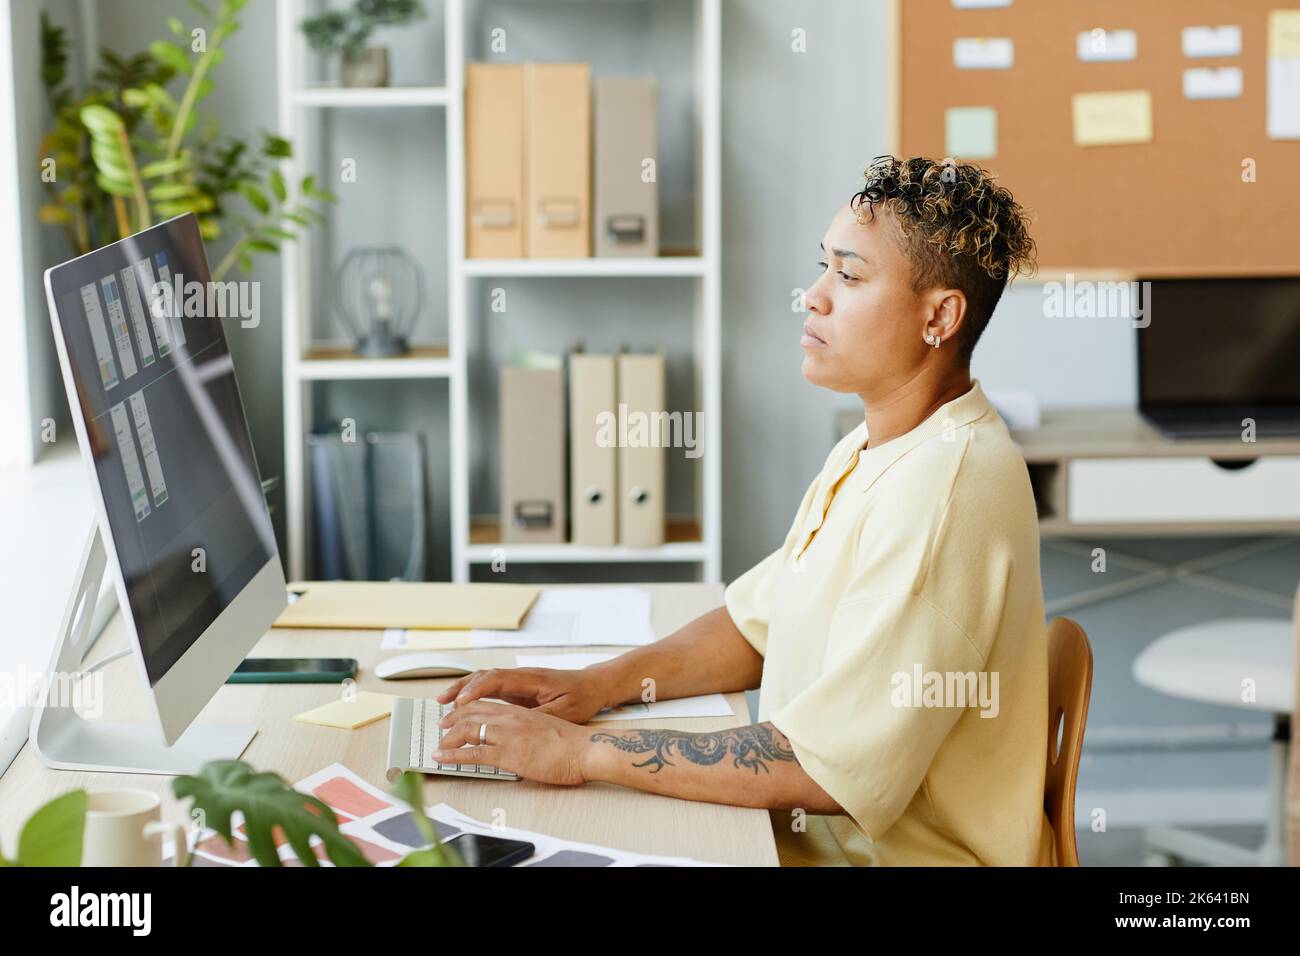 Side view portrait of tattooed black woman using computer in office while designing mobile app interface Stock Photo